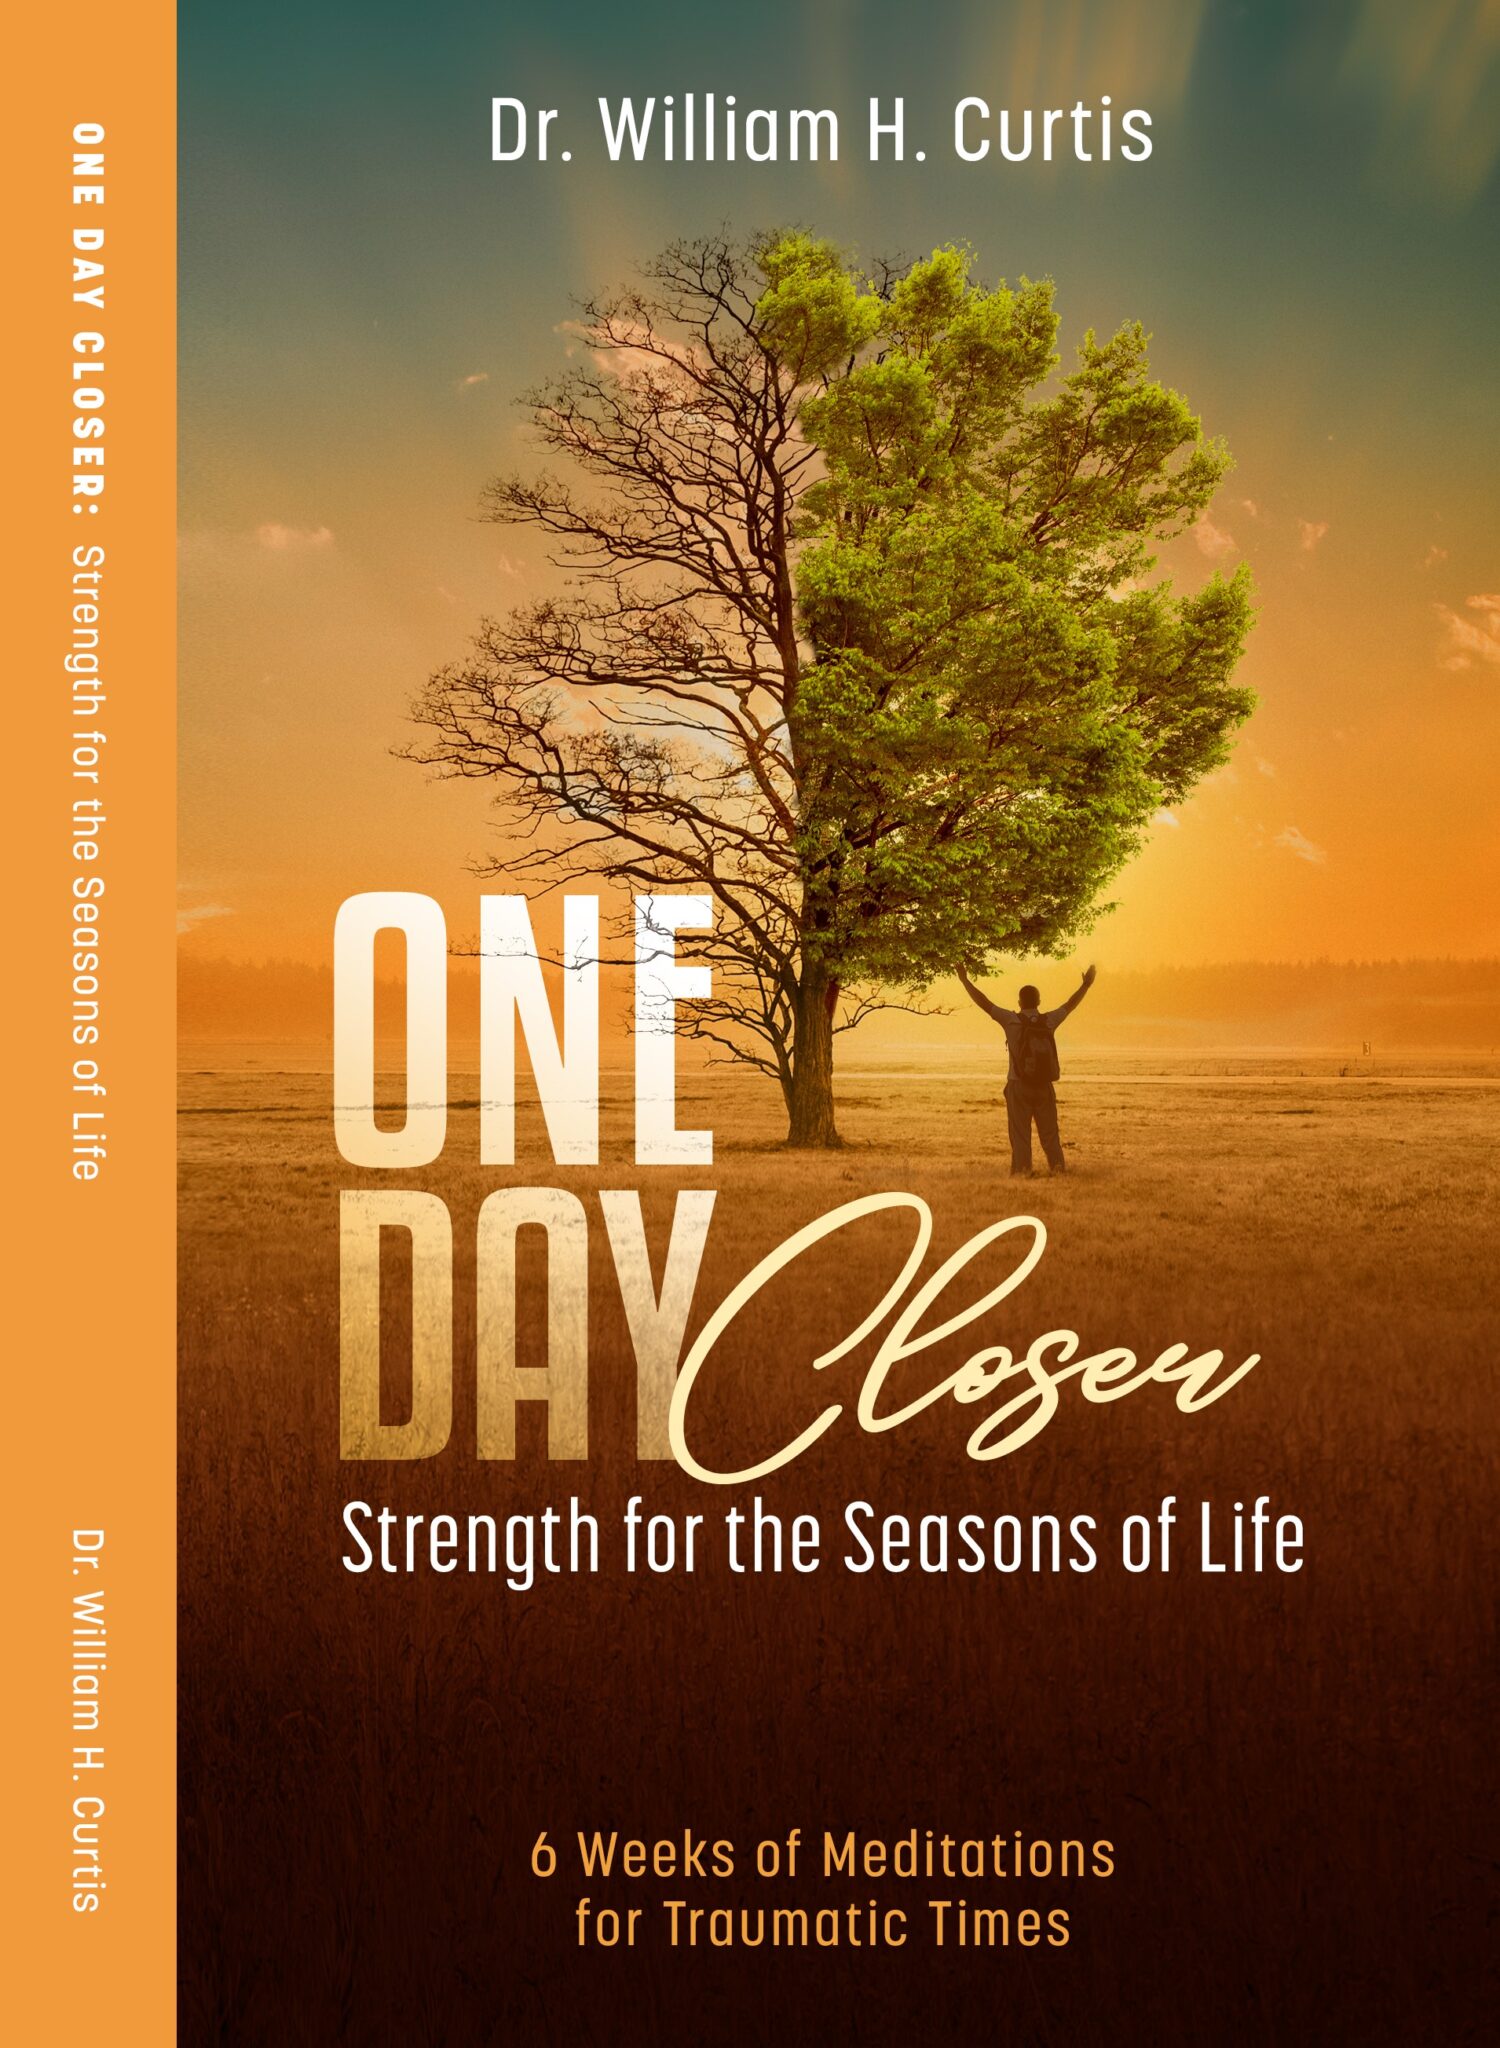 One Day Closer: Strength for the Seasons of Life